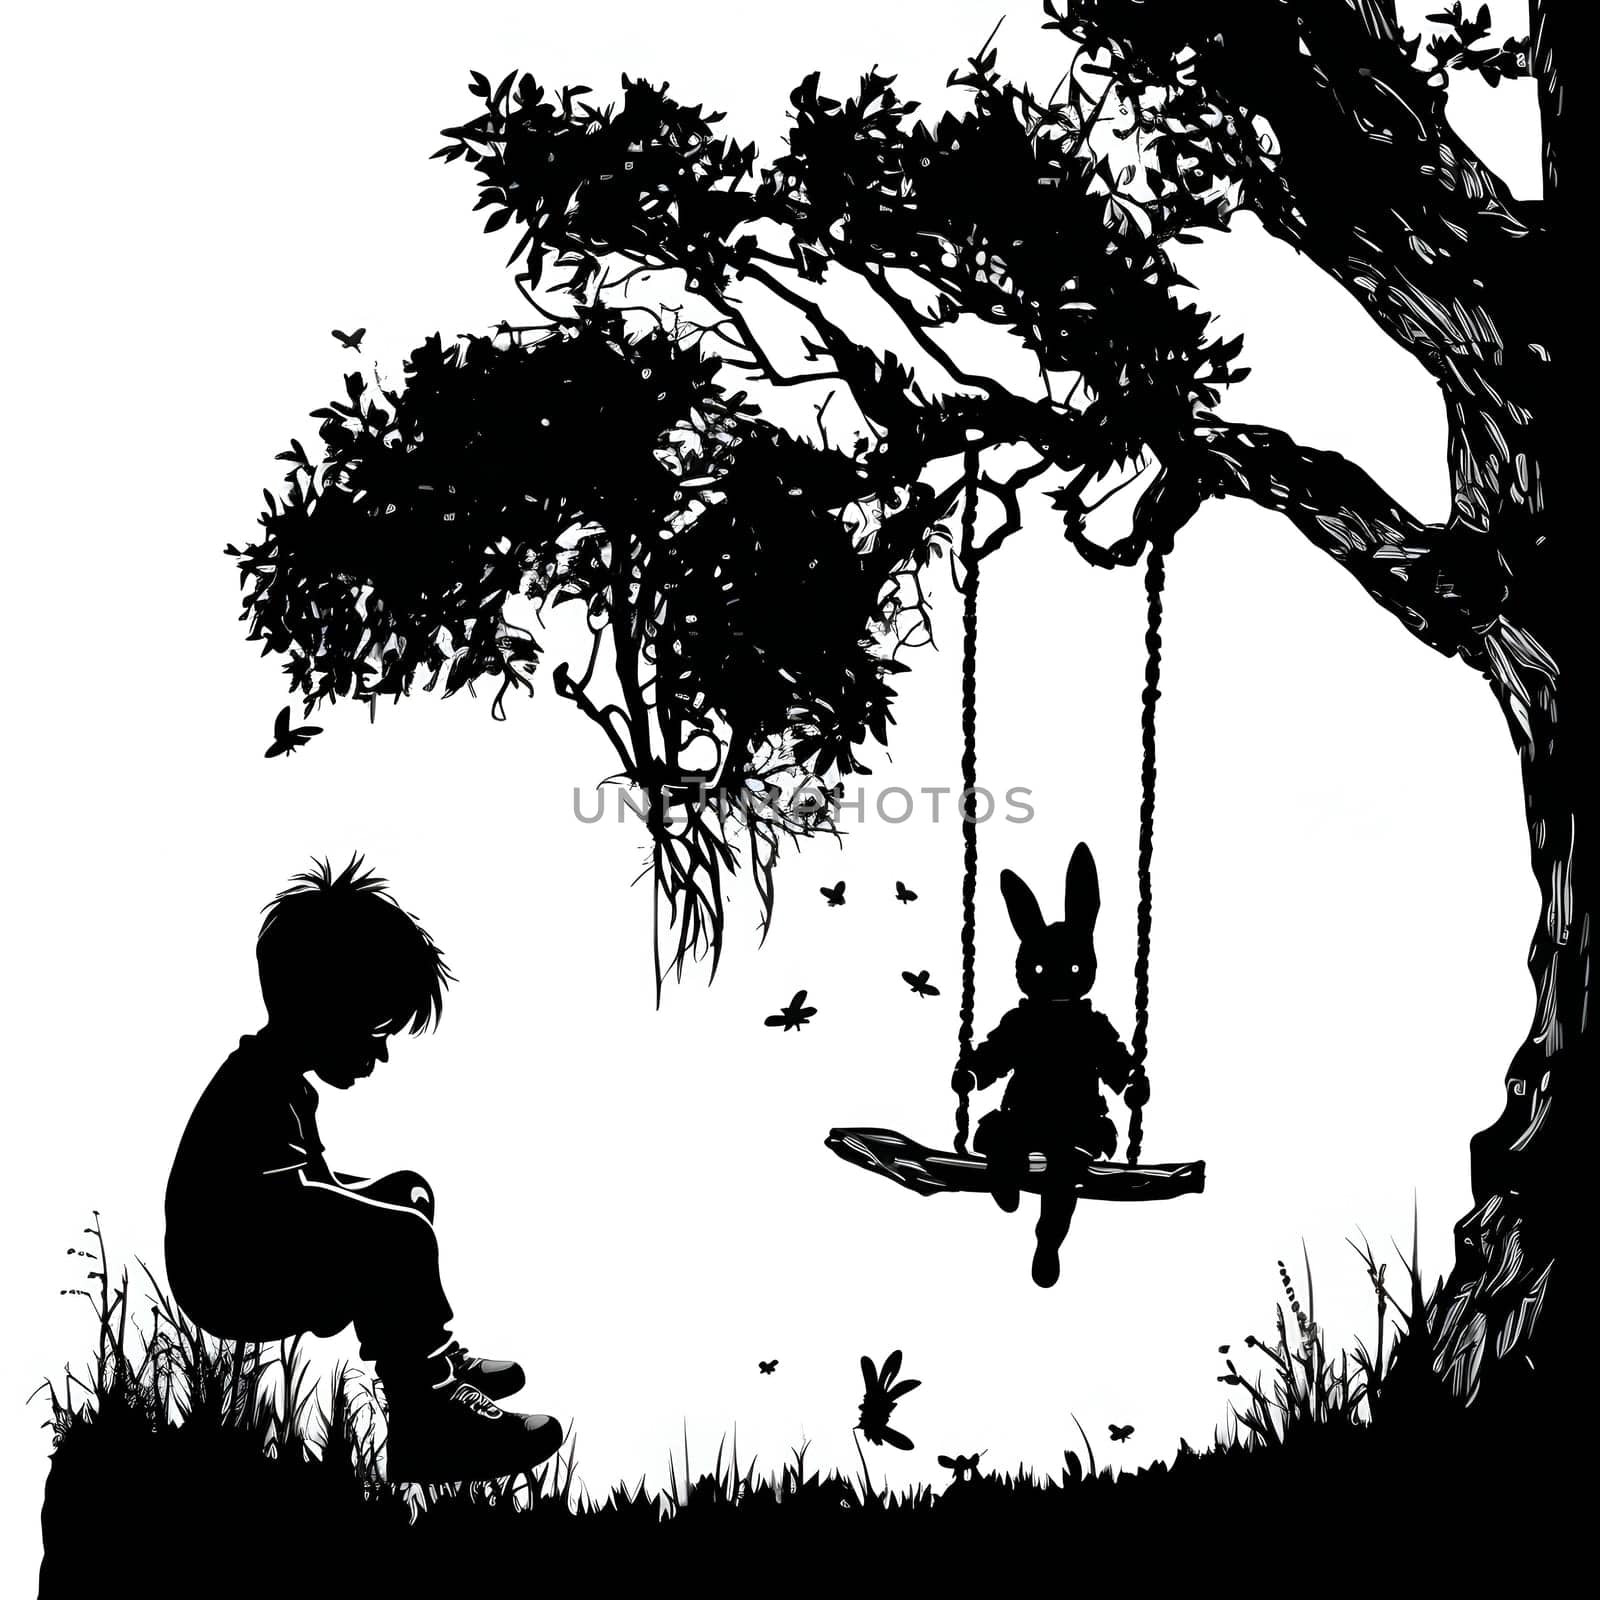 Vector illustration of a boy and a bunny on a swing in black silhouette against a clean white background, capturing graceful forms.